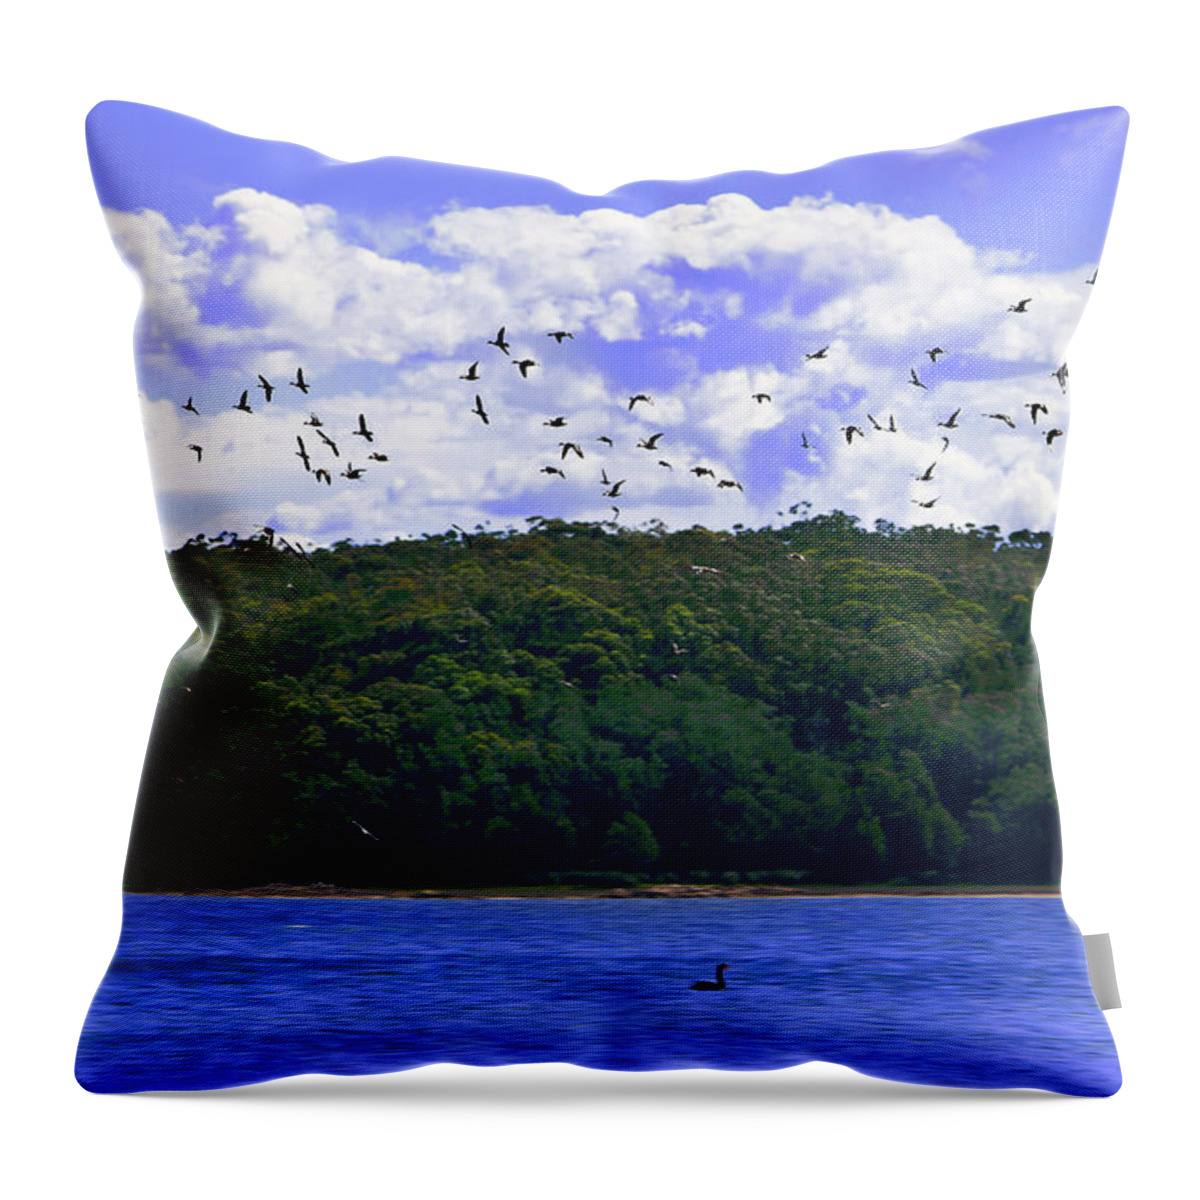 Duck Throw Pillow featuring the photograph Duck Flying Over The Lake by Miroslava Jurcik